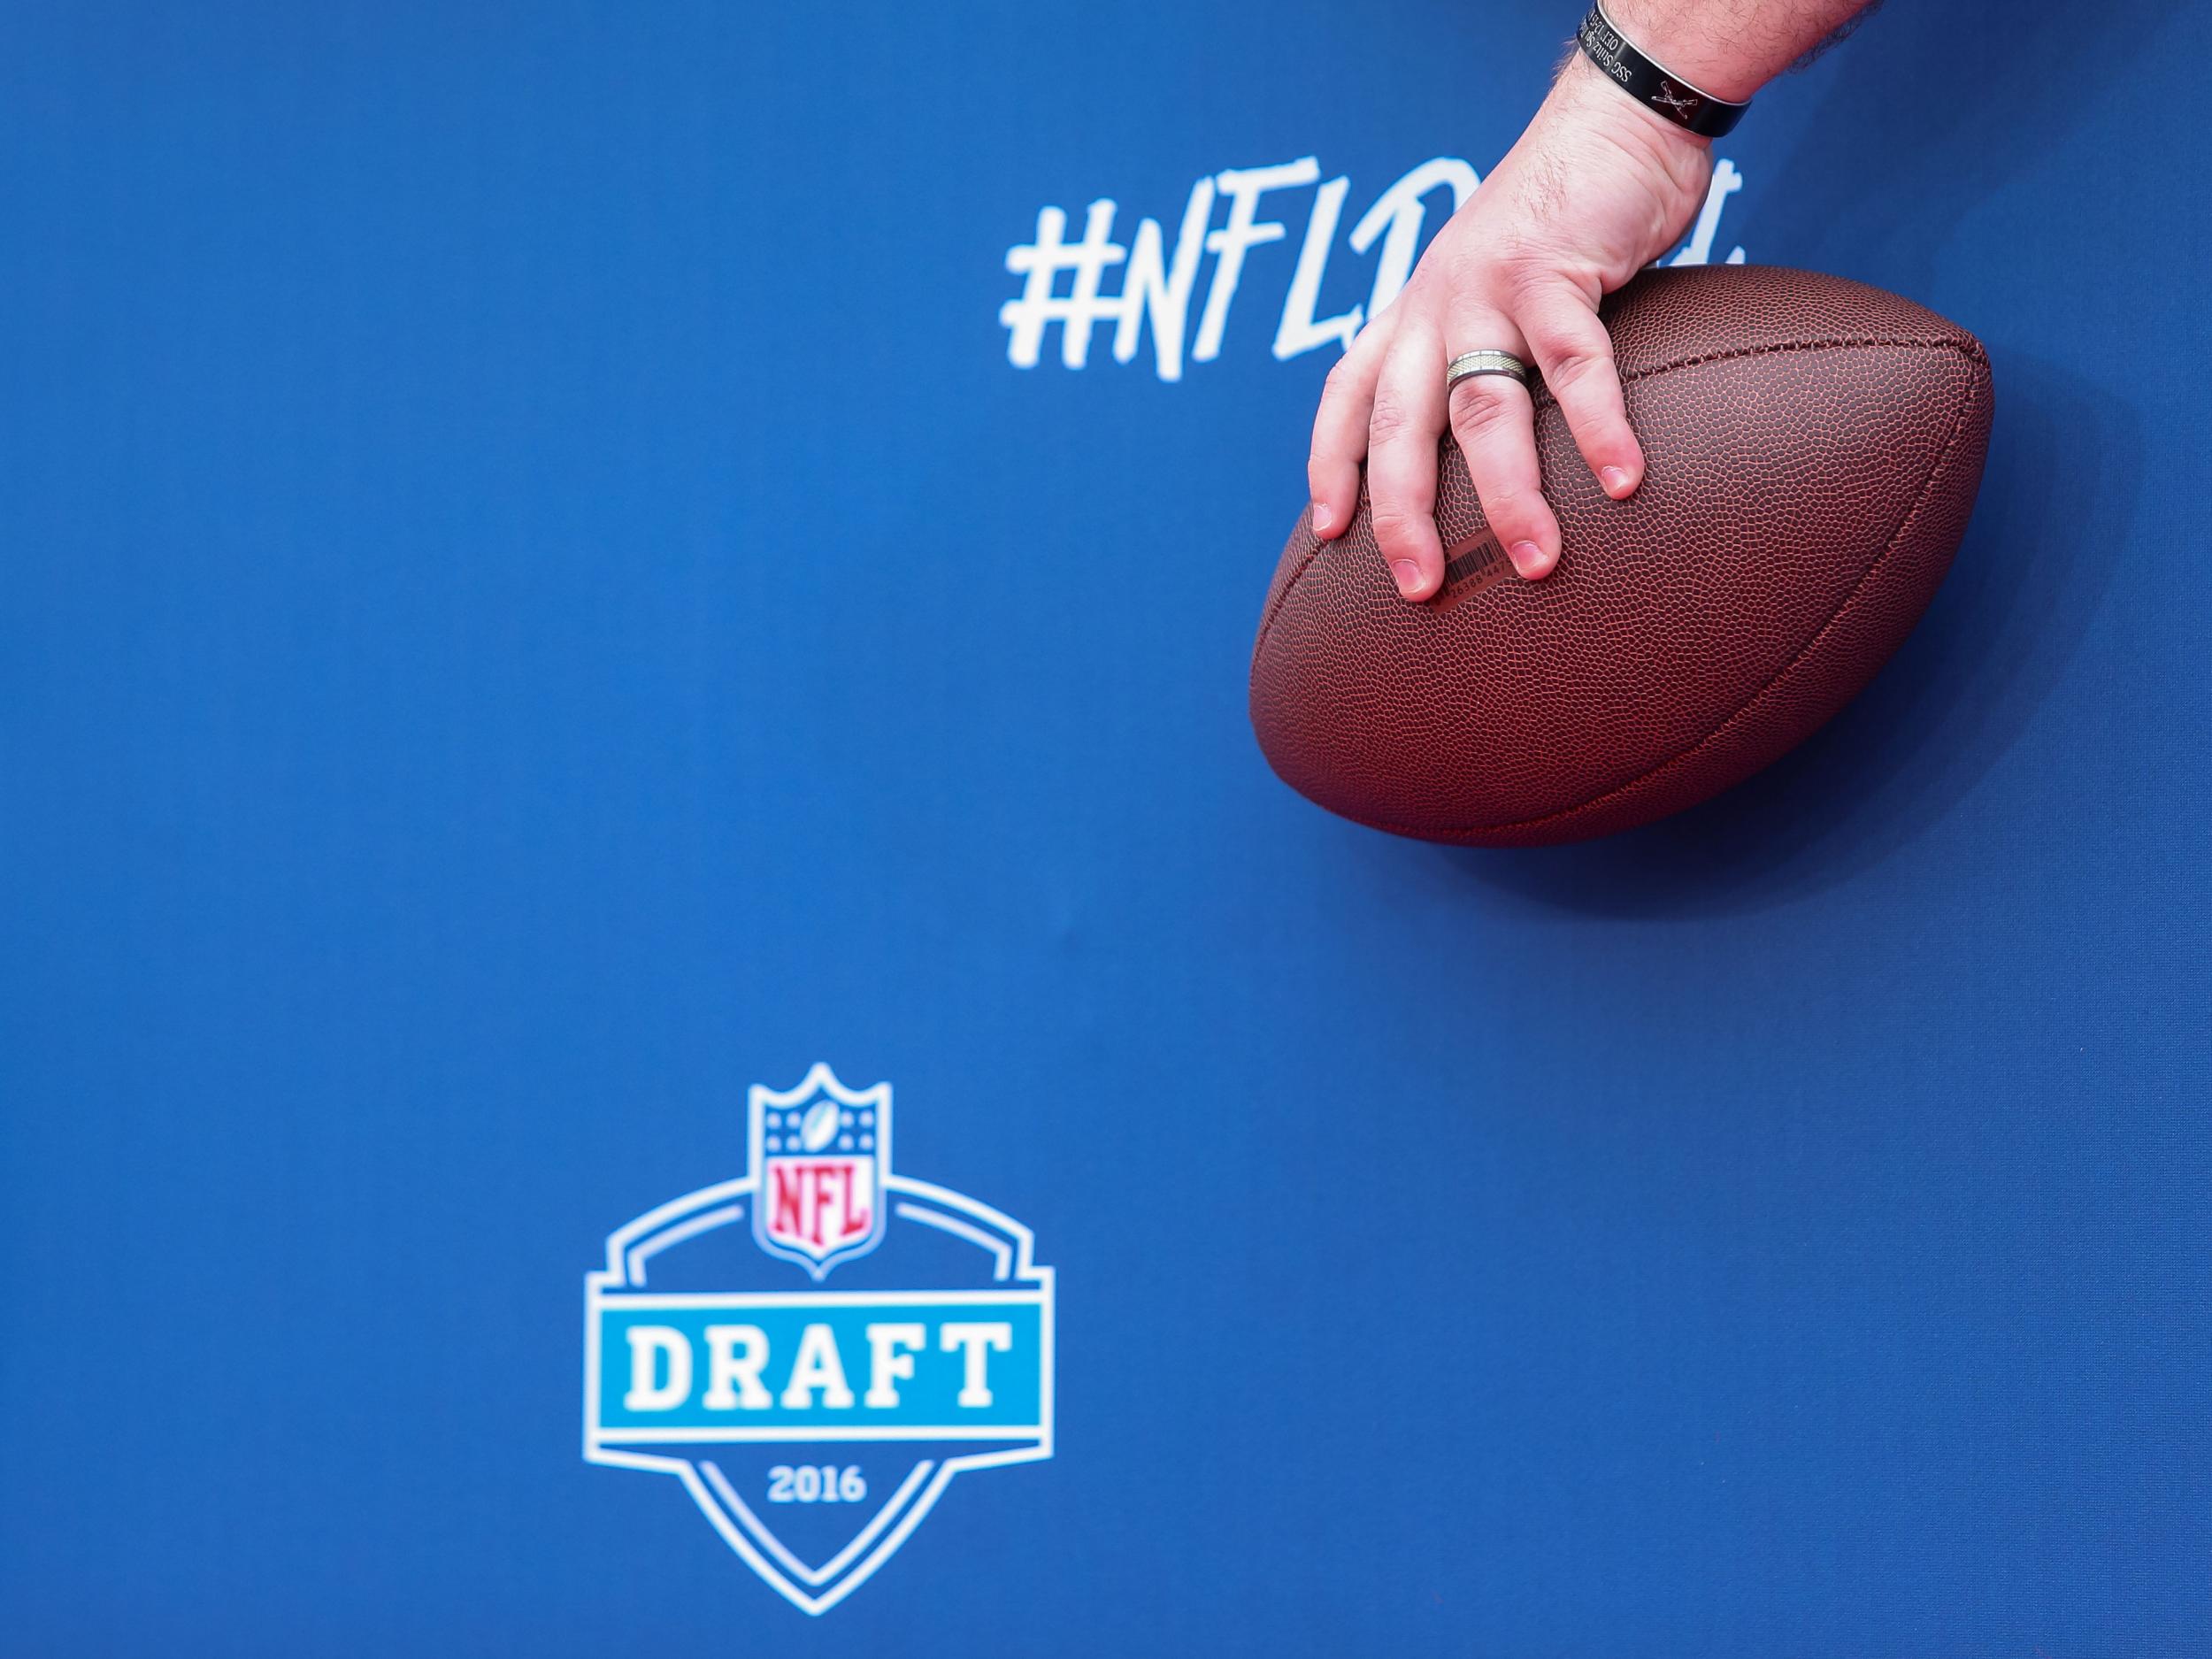 It's nearly draft time, and America is excited